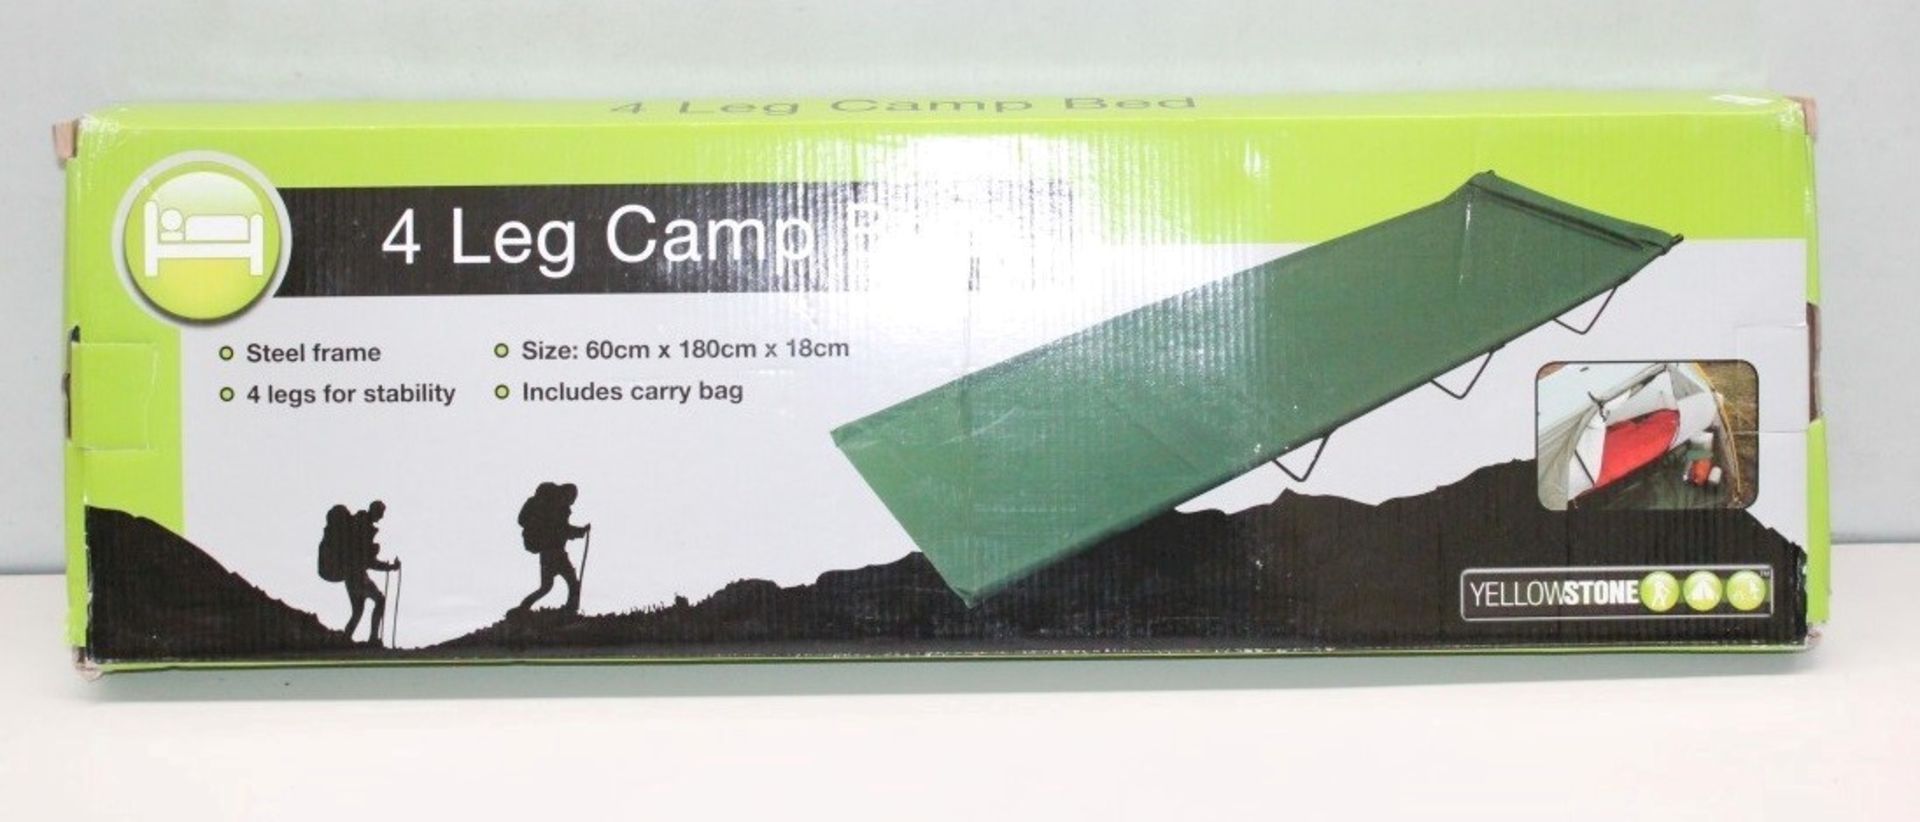 1 x Yellowstone 4 Leg Camp Bed - Green - 8mm Steel frame - Dimensions: 60 x 180 x 18cm - New & Boxed - Image 2 of 2